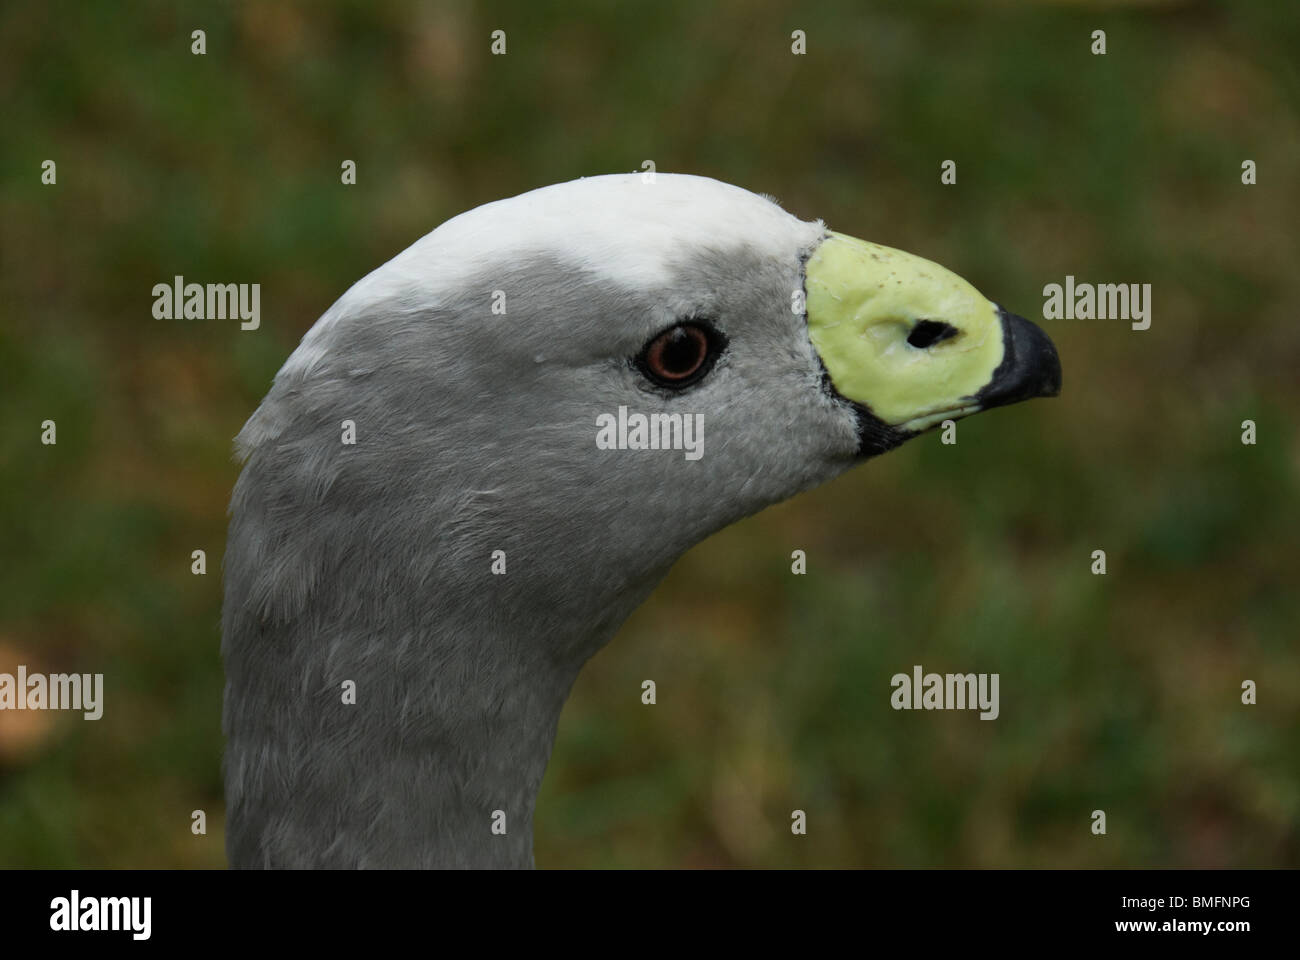 Detail of the head of a cape barren goose (Cereopsis novaehollandiae). Stock Photo